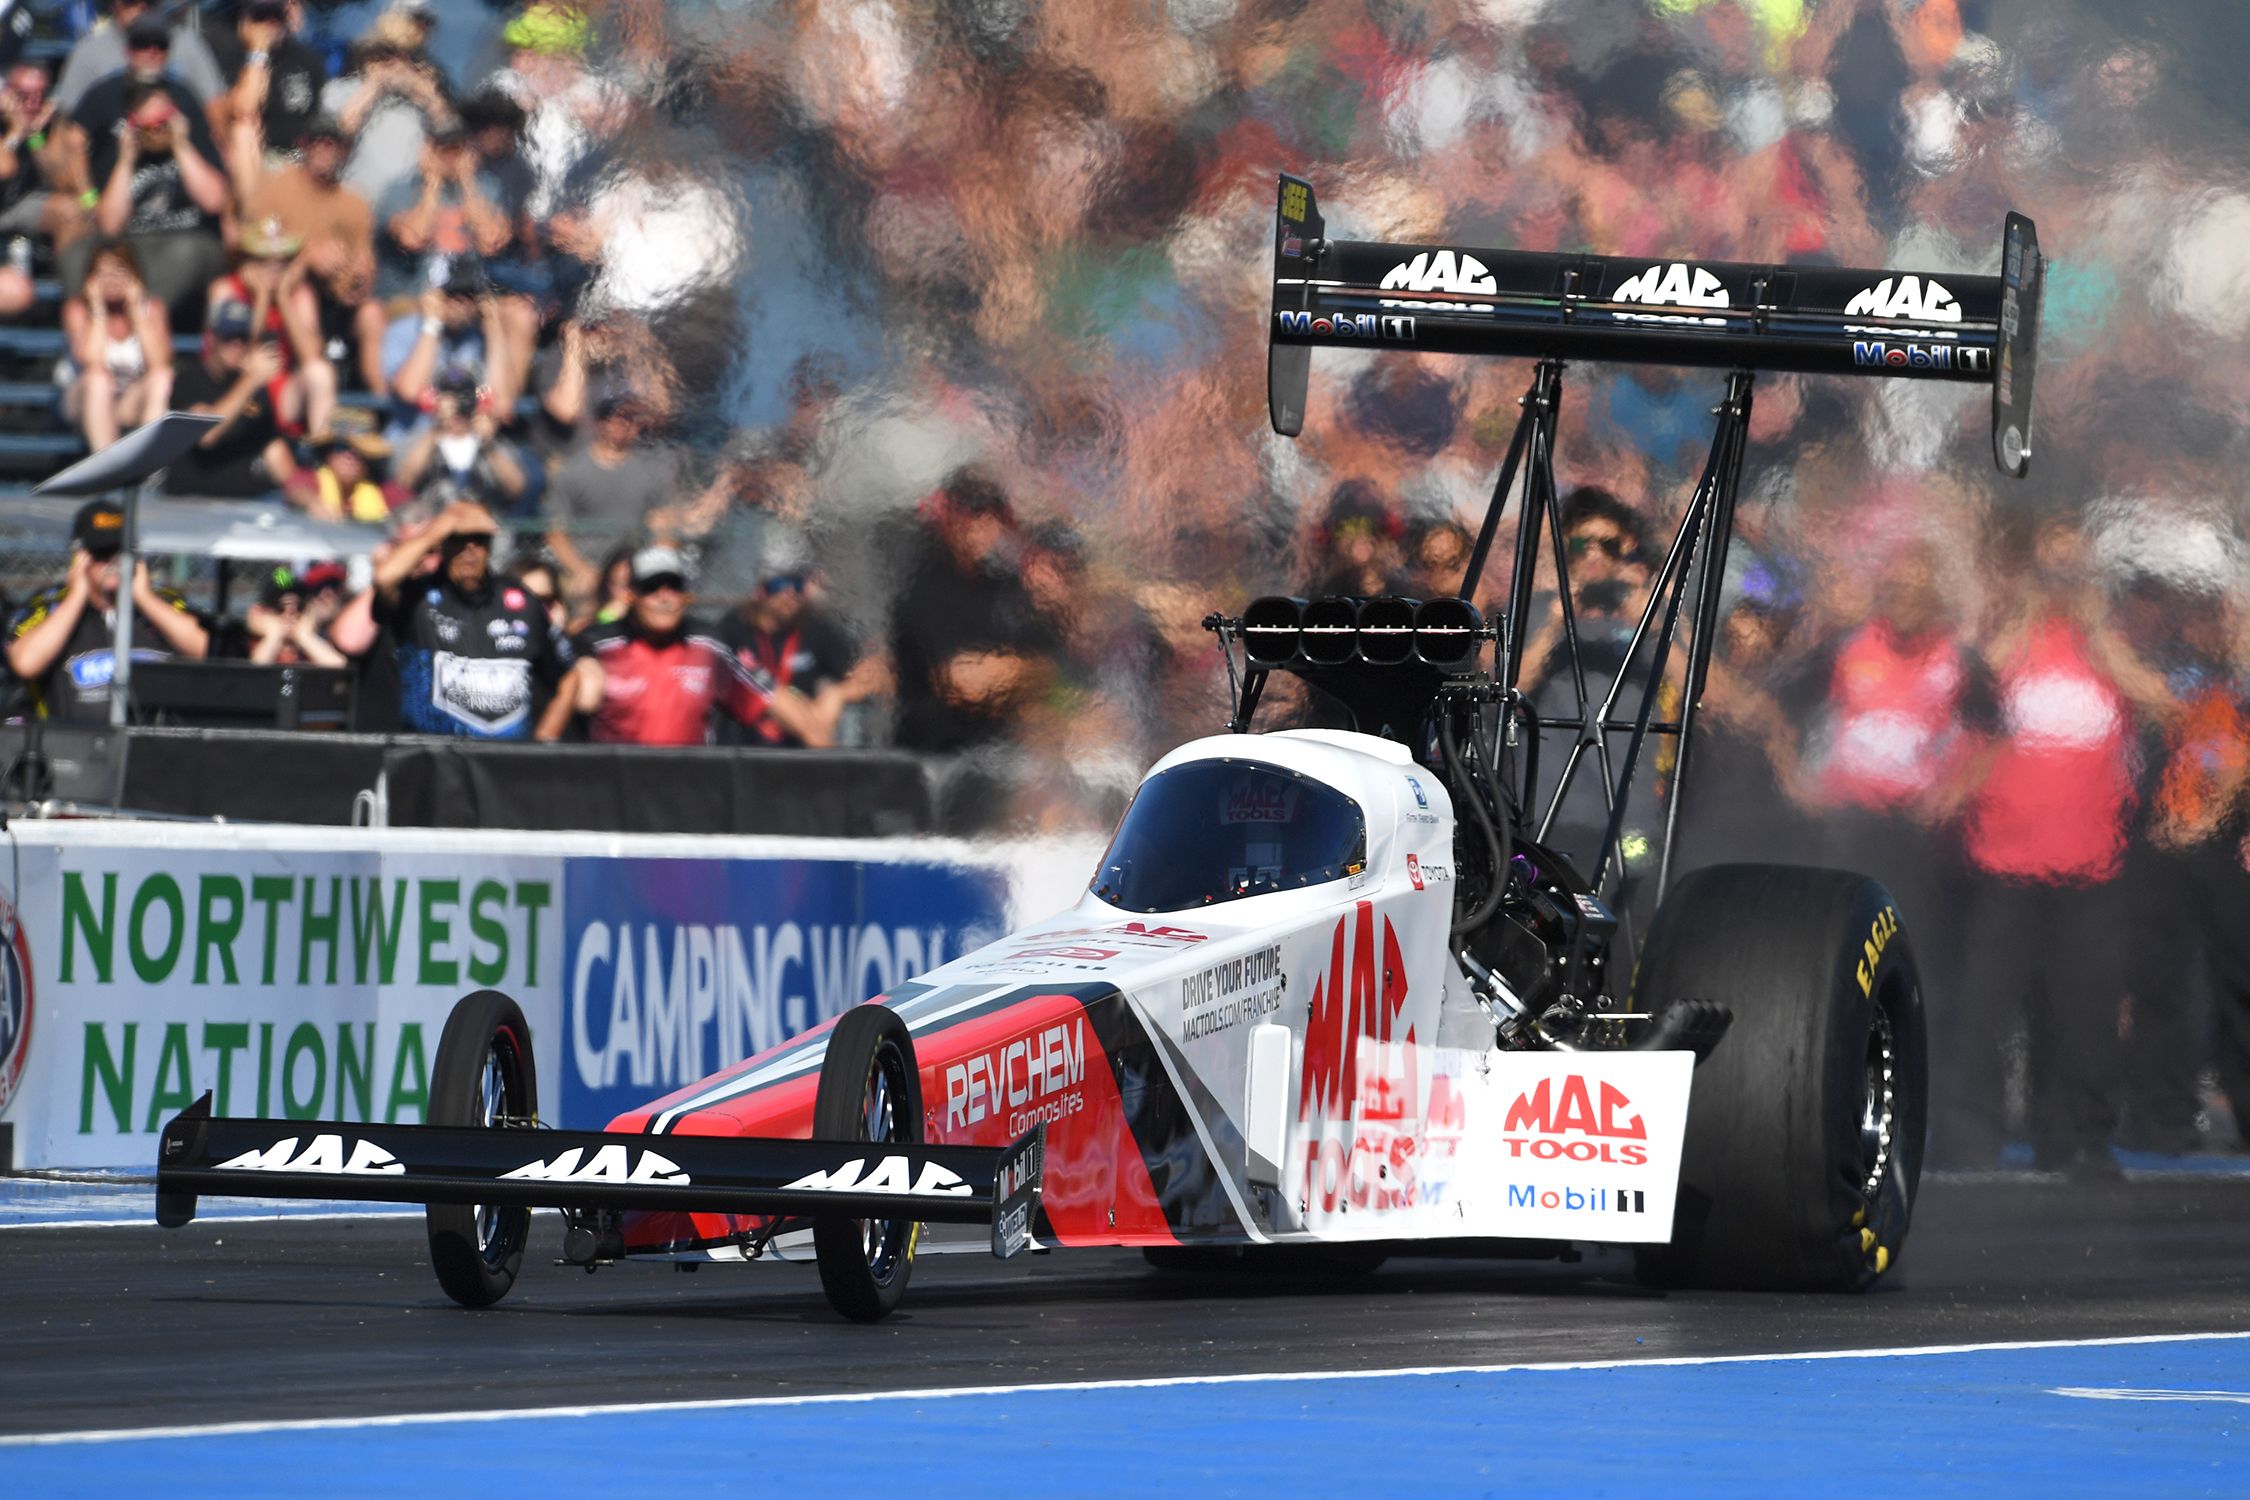 NHRA Midwest Nationals Saturday qualifying report, Sunday elimination matchups pic